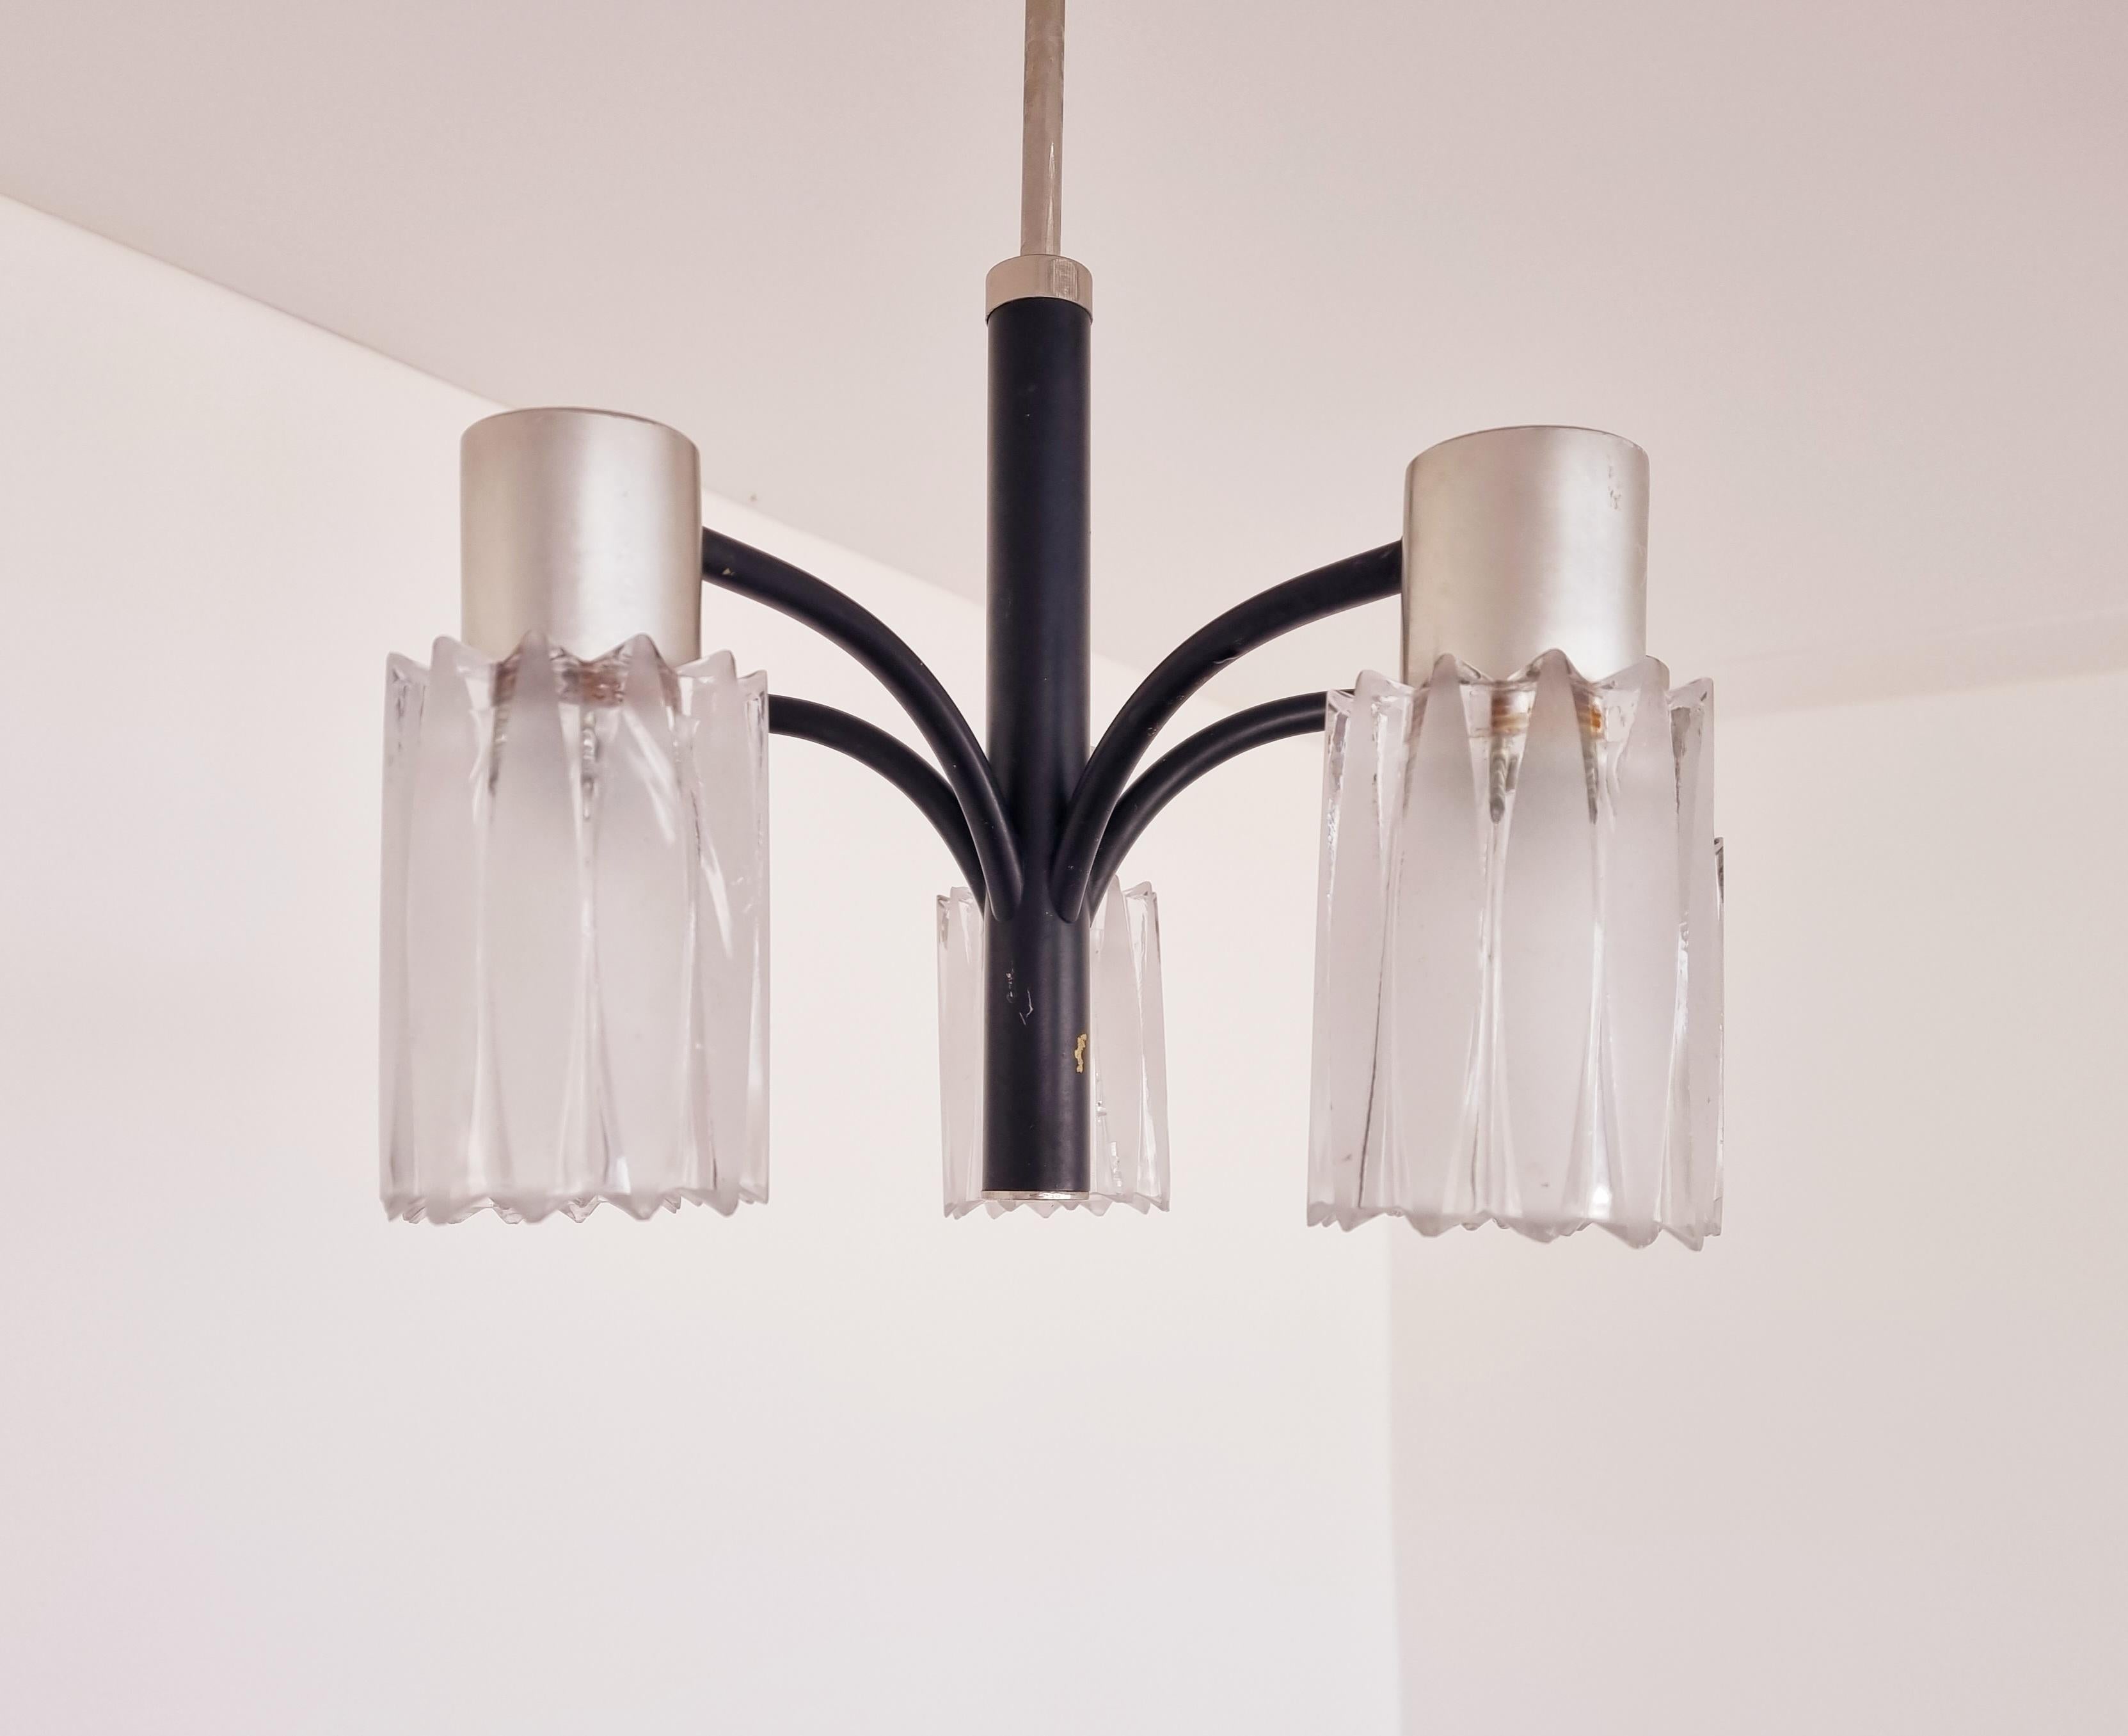 Very Rare Midcentury Chandelier, Murano Glass, Italy, 1960s For Sale 2